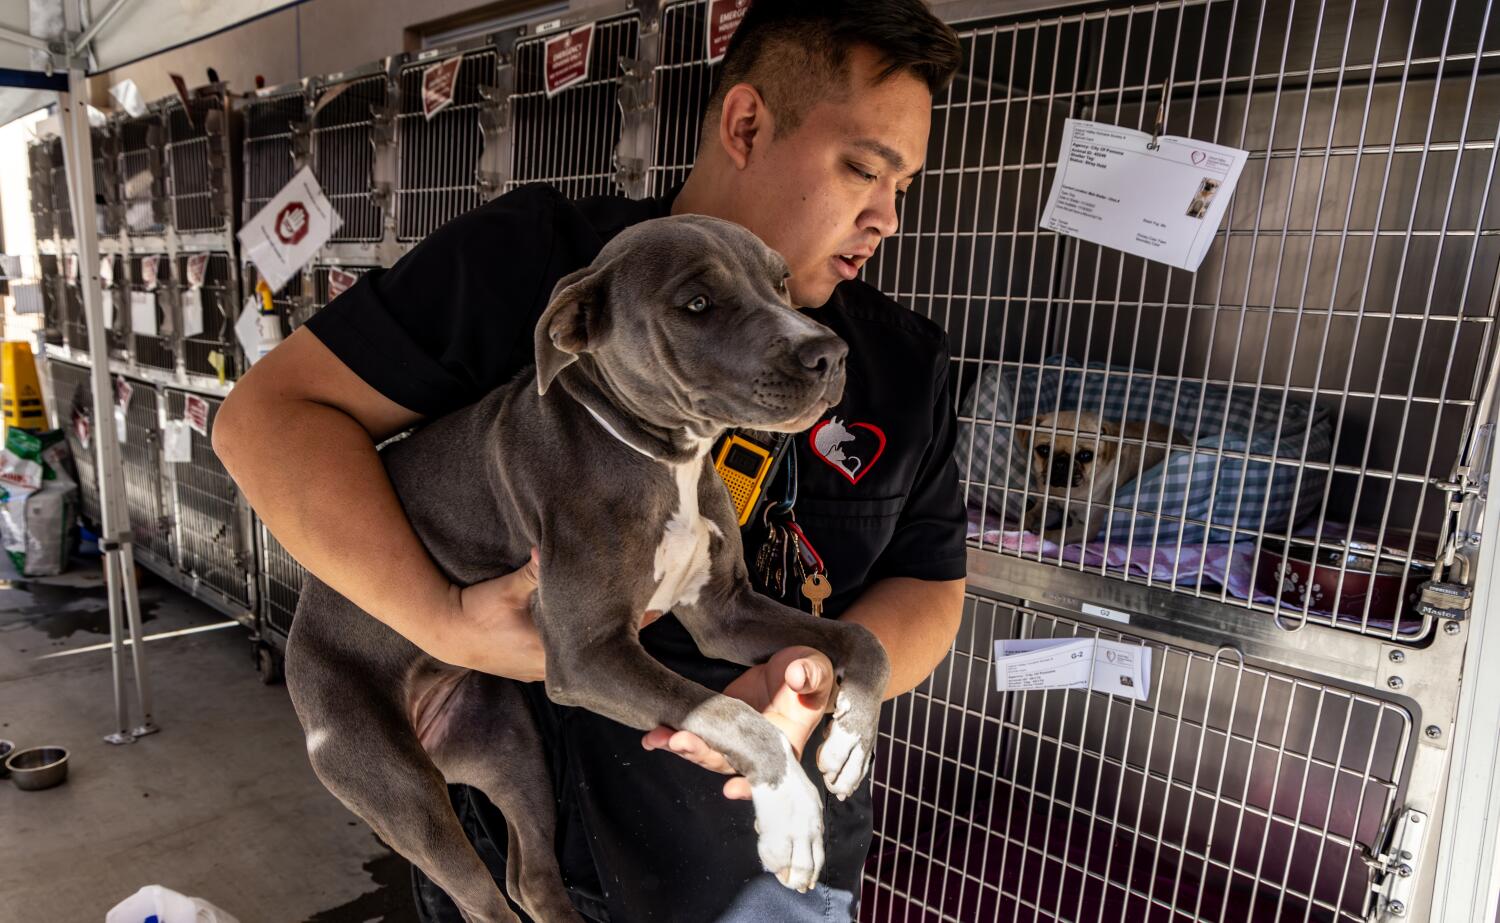 ‘We’re inundated’: Animal shelters across the U.S. are overflowing